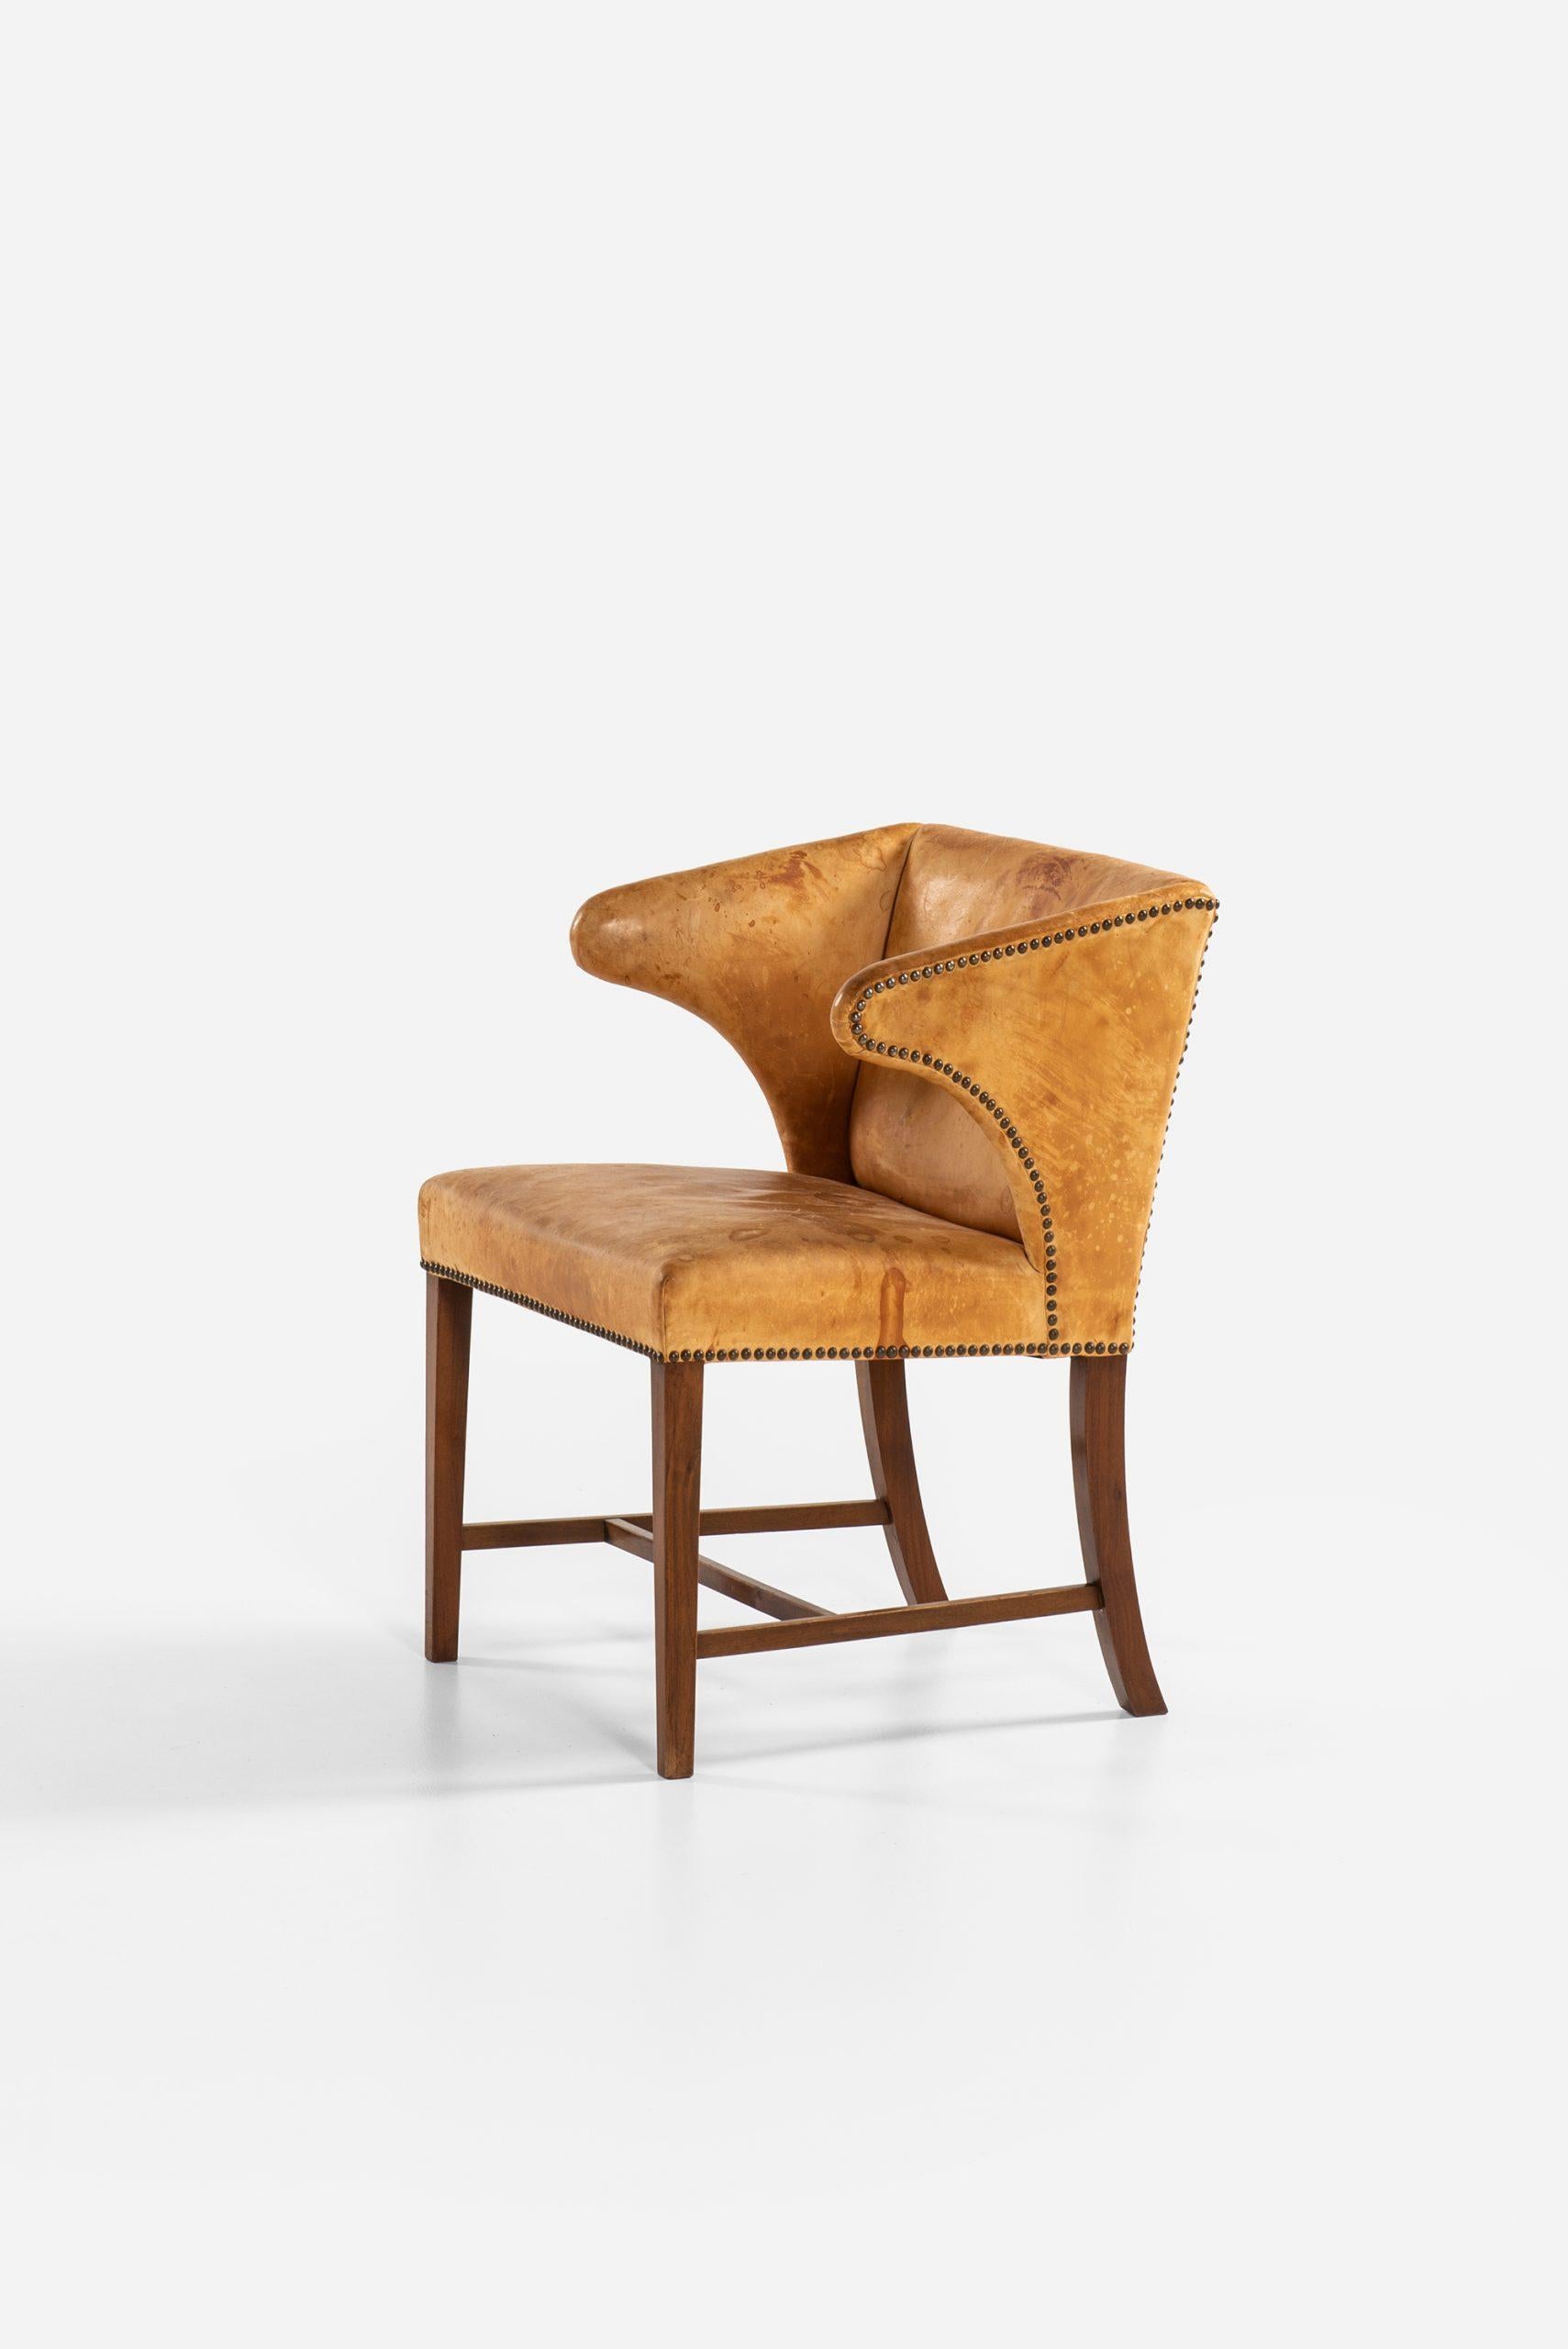 Armchair Attributed to Frits Henningsen by cabinetmaker Frits Henningsen In Good Condition For Sale In Limhamn, Skåne län